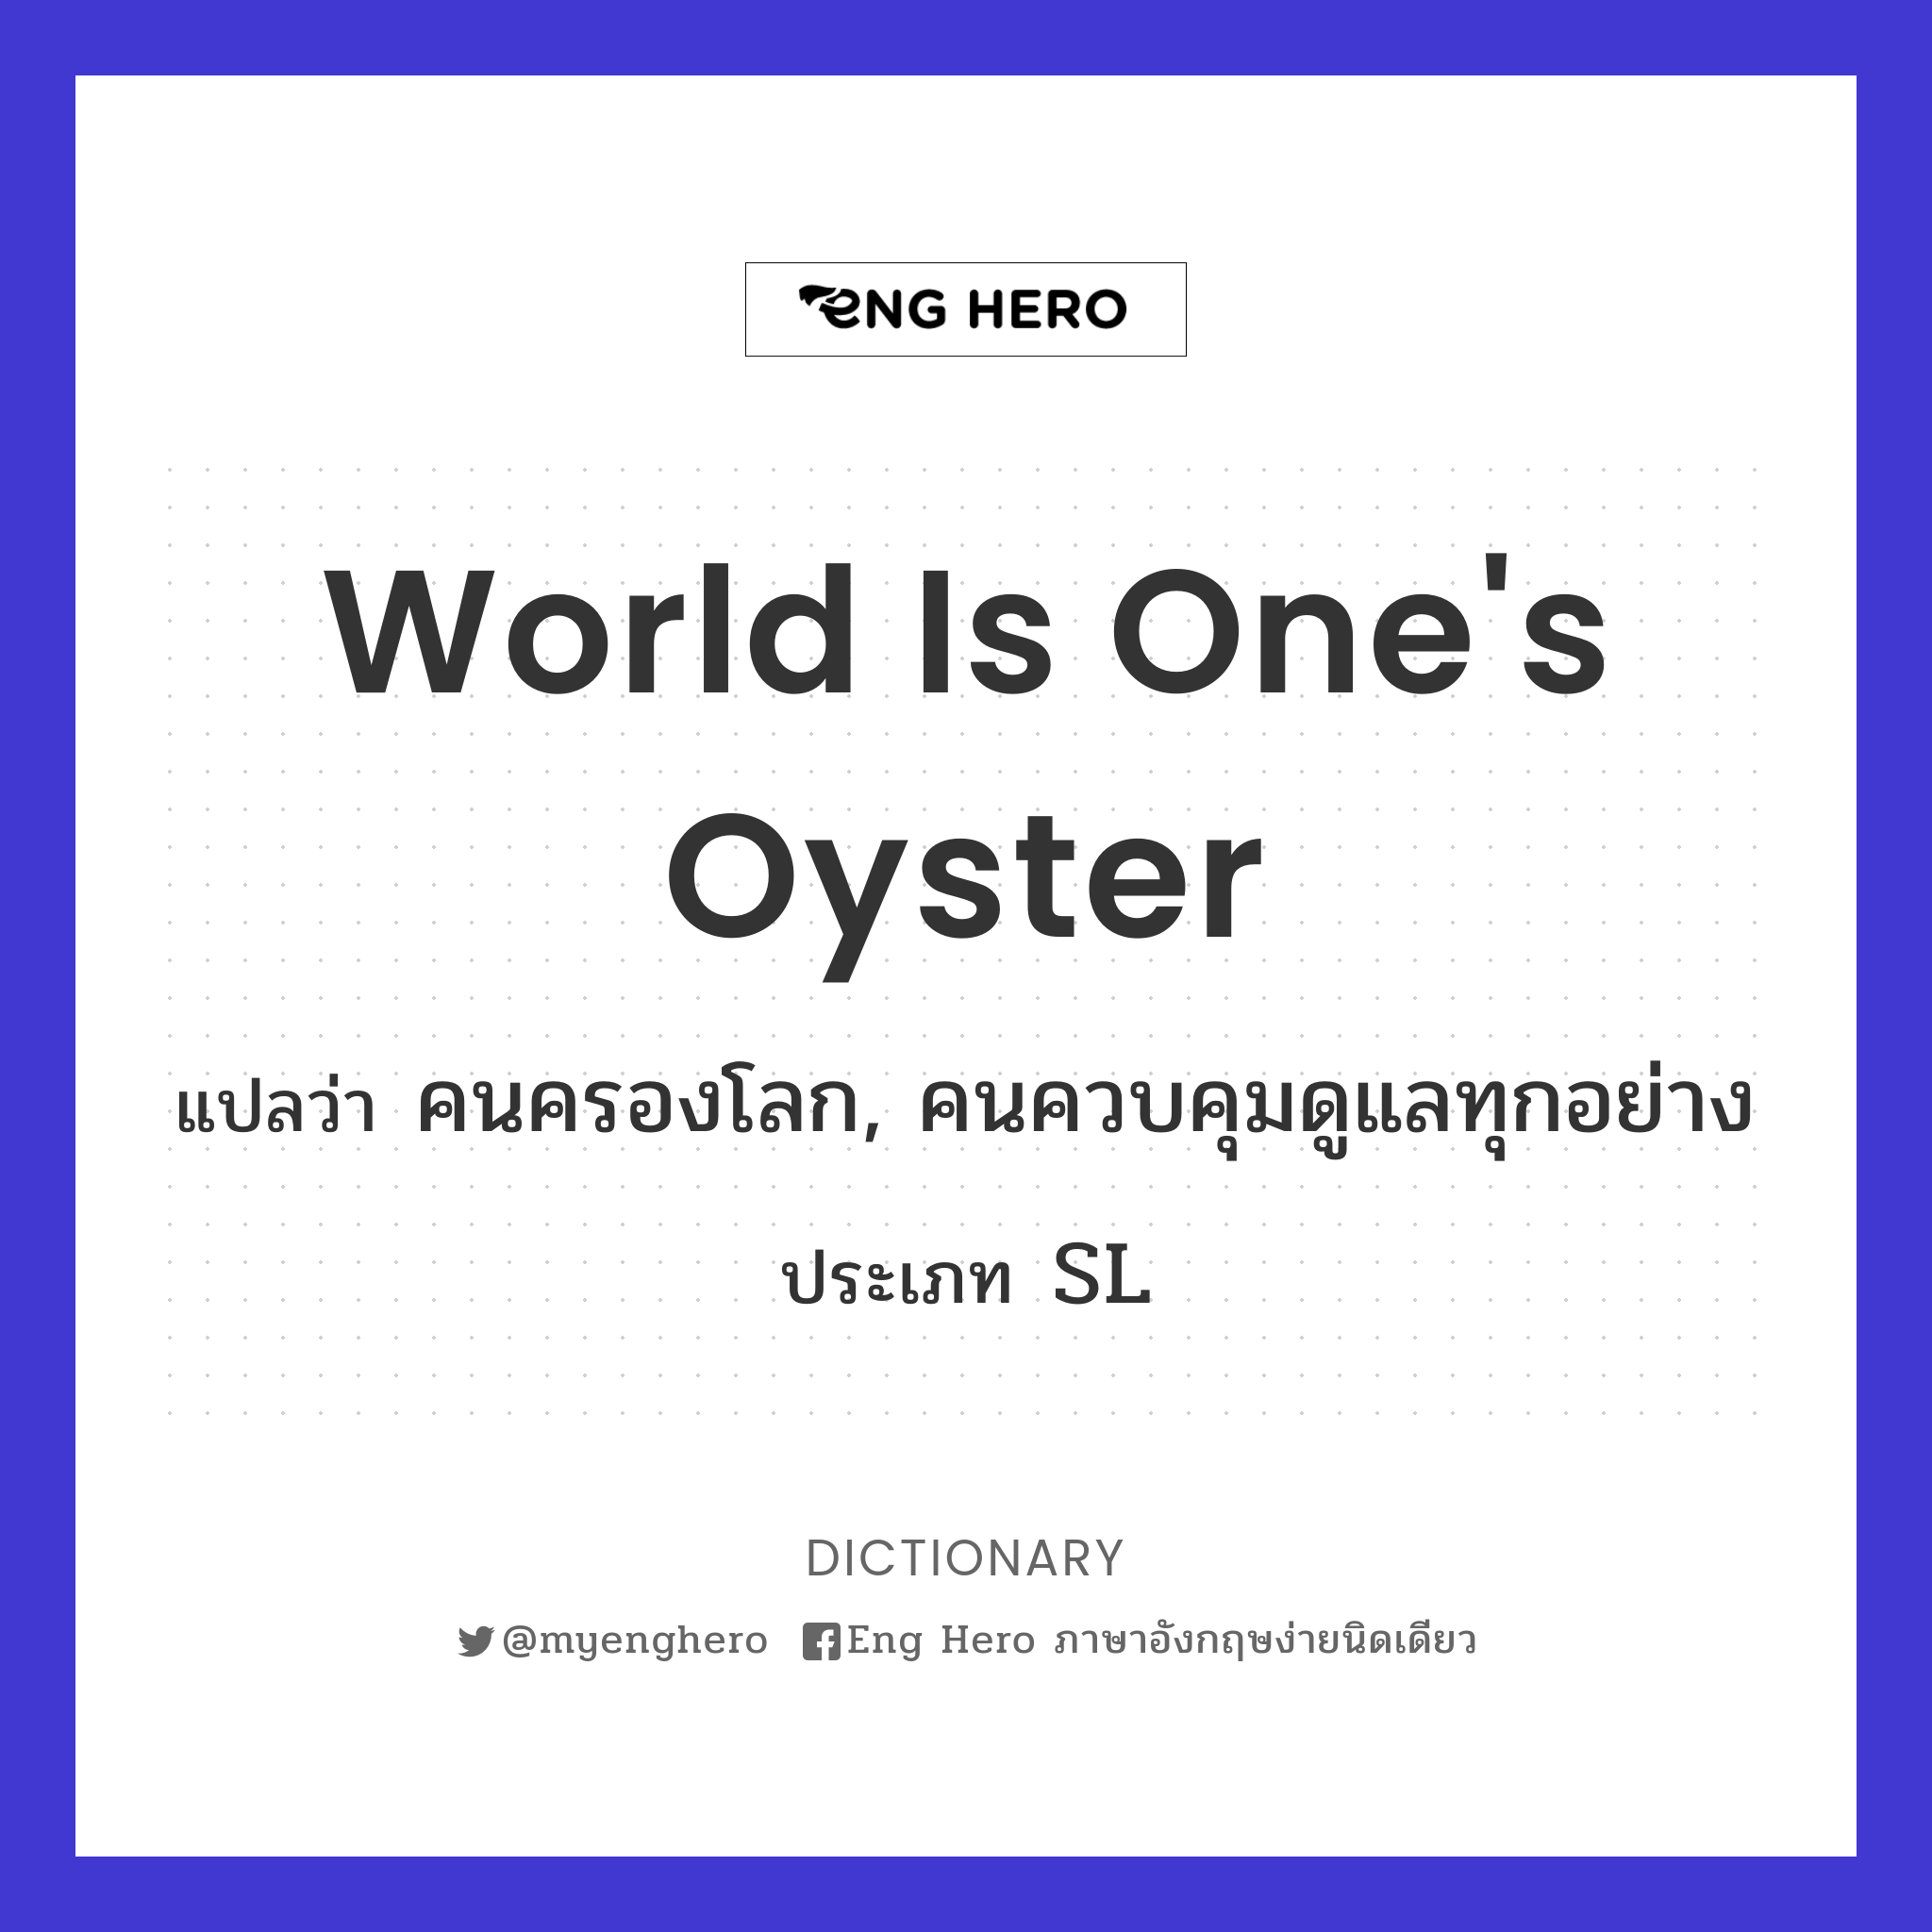 world is one's oyster